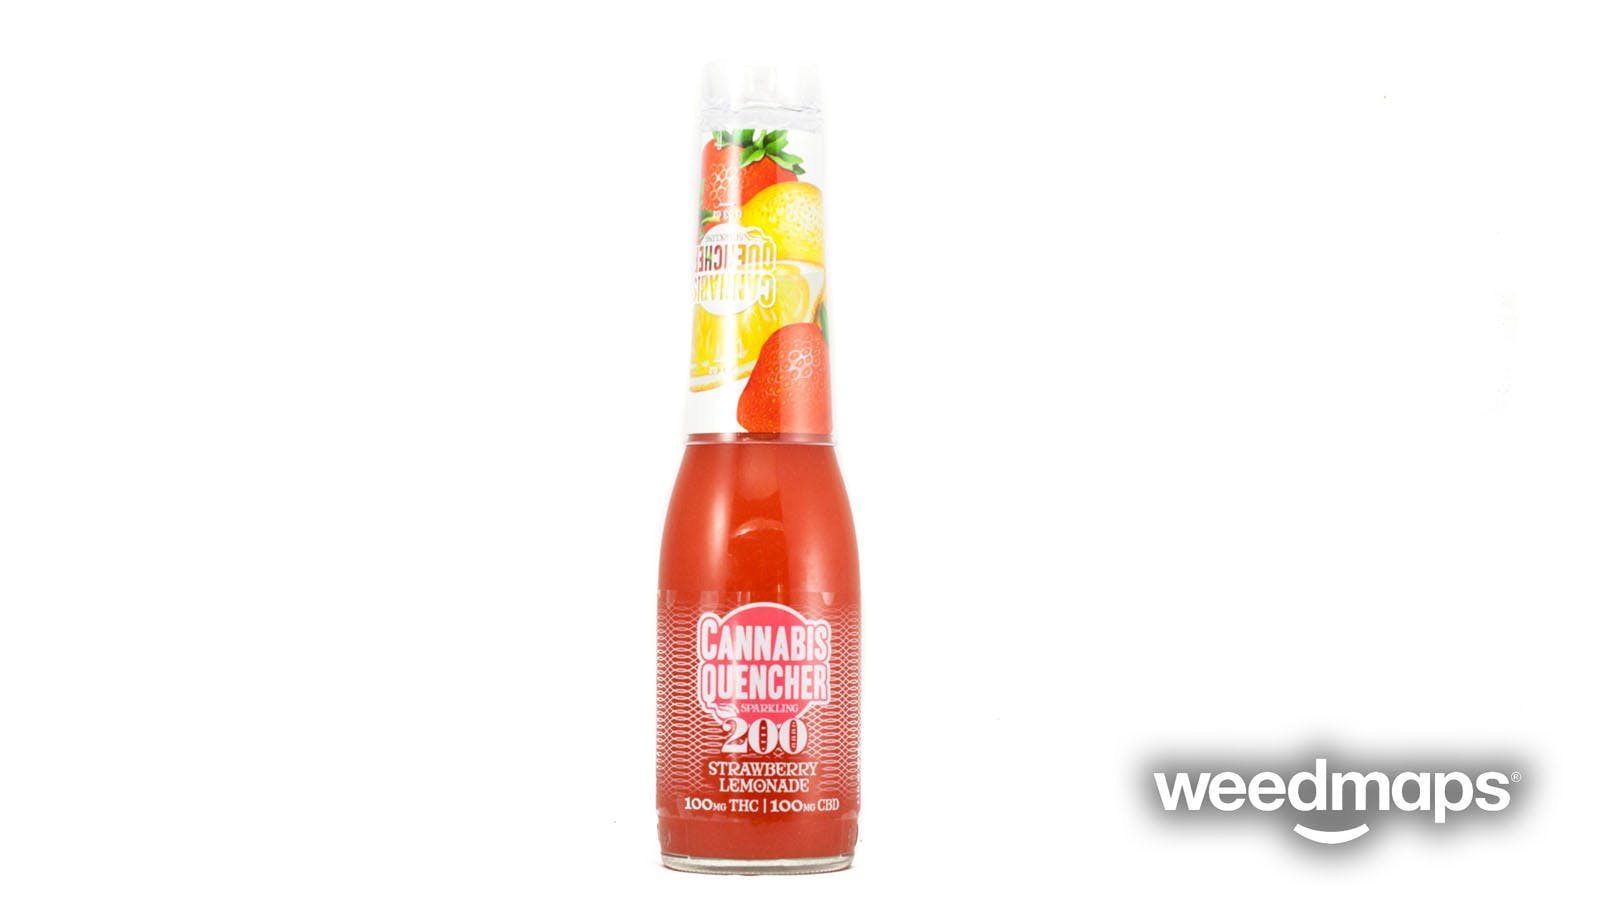 drink-strawberry-quencher-200mg